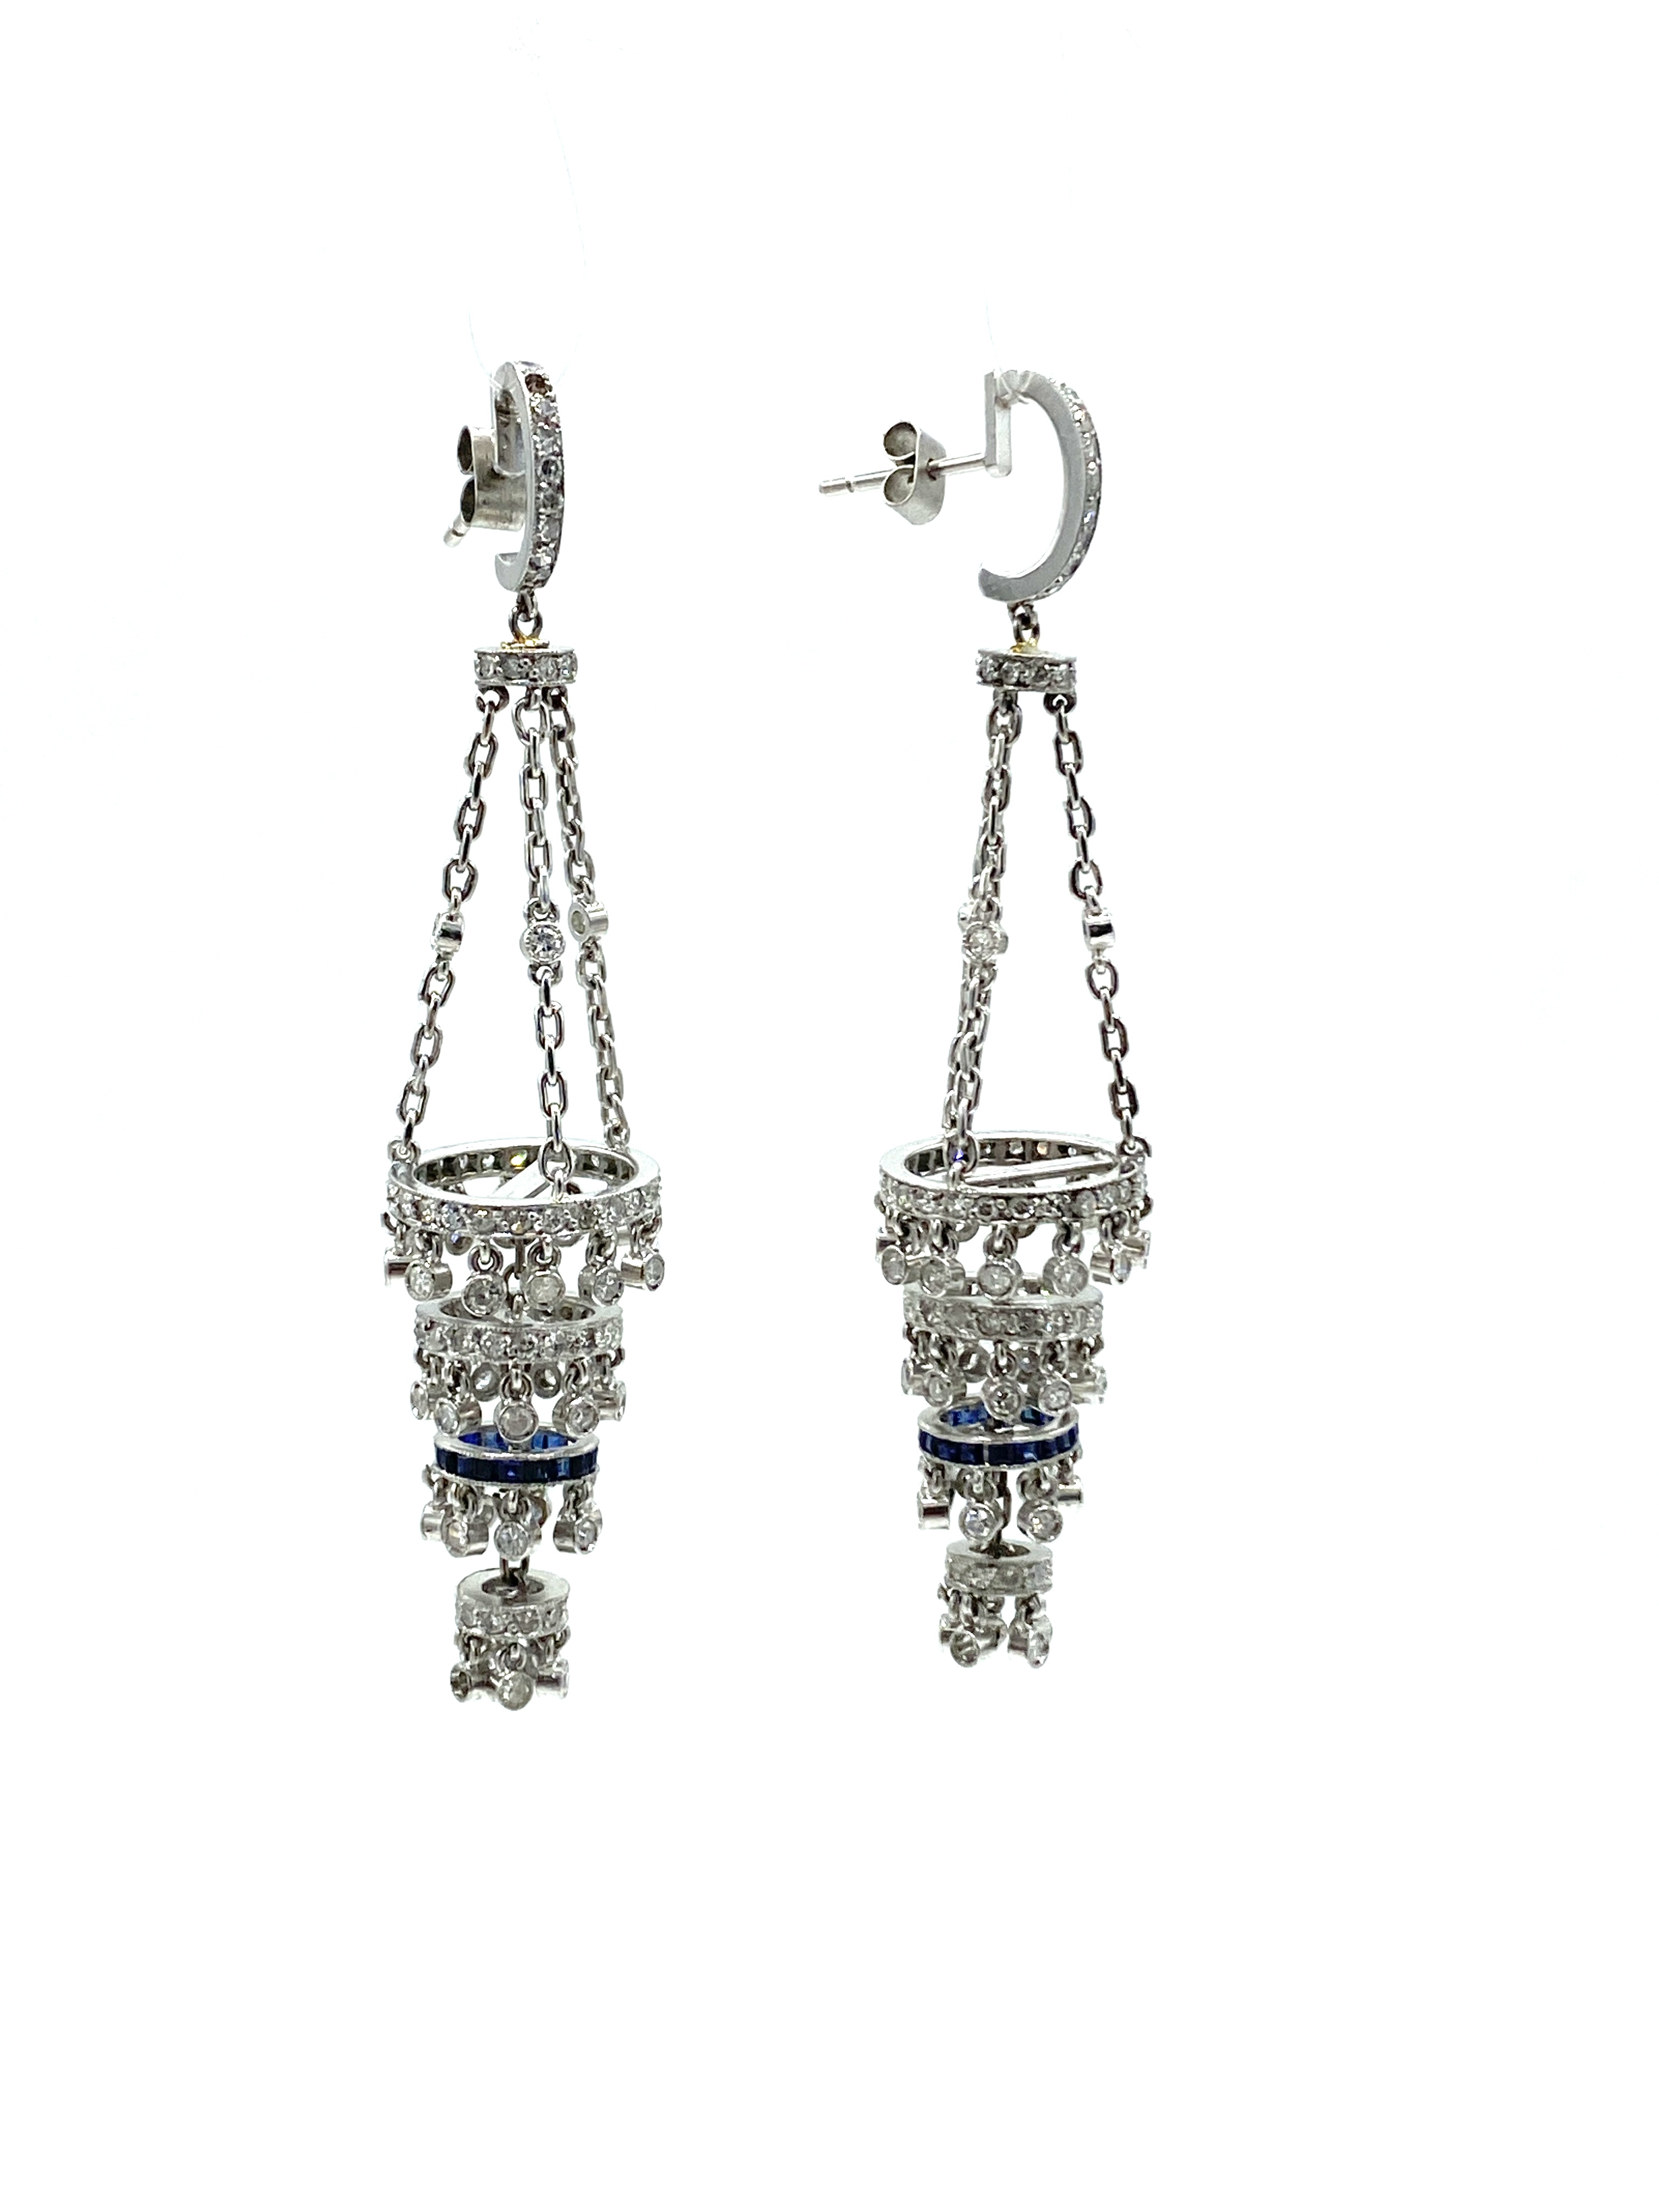 Pair of chandelier earrings set with diamonds and sapphires - Image 3 of 5